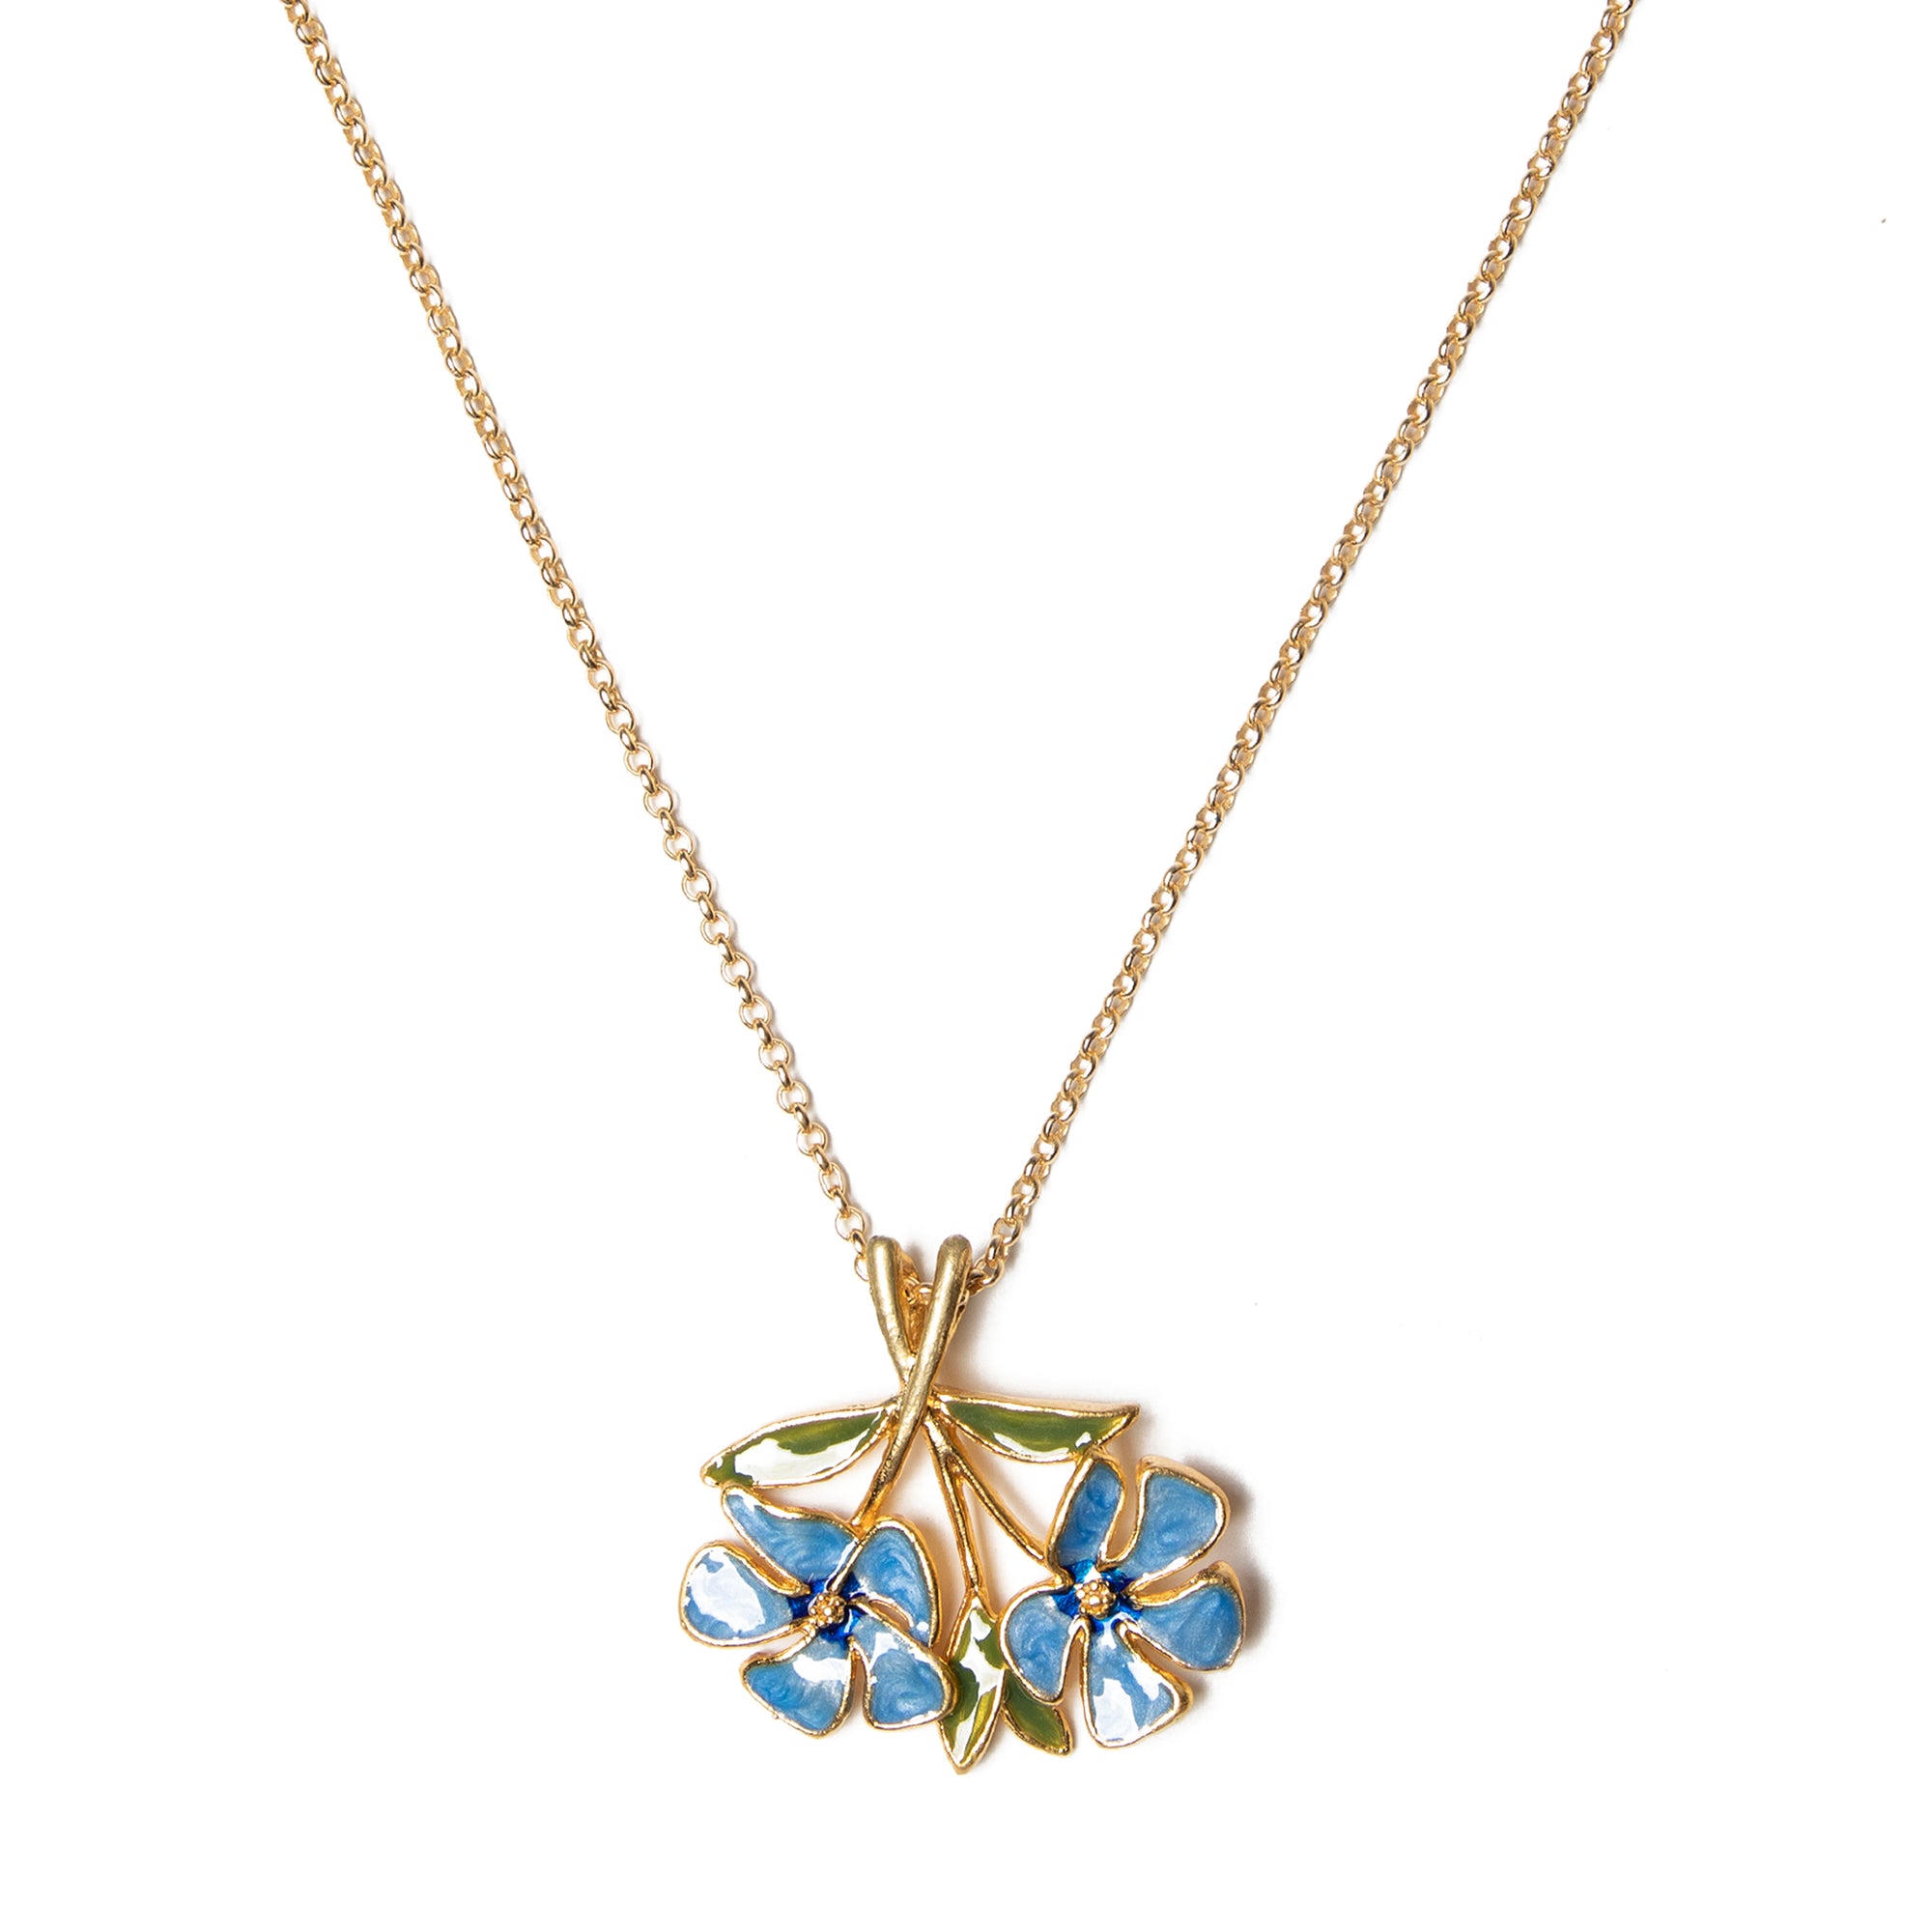 Manet Periwinkle Pendant | Getty Store